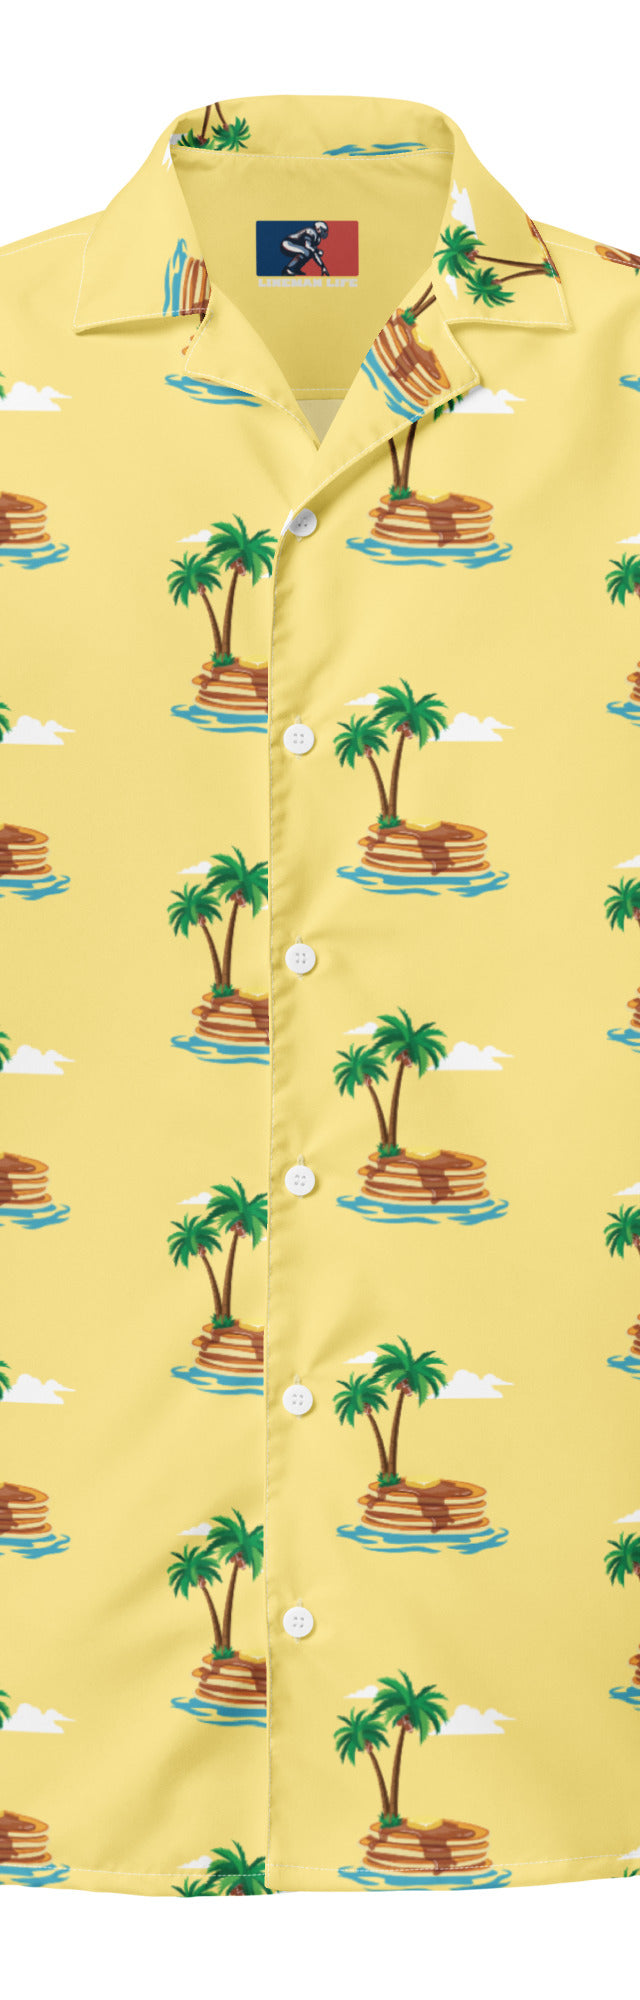 Pancakes and Palm Trees - Yellow